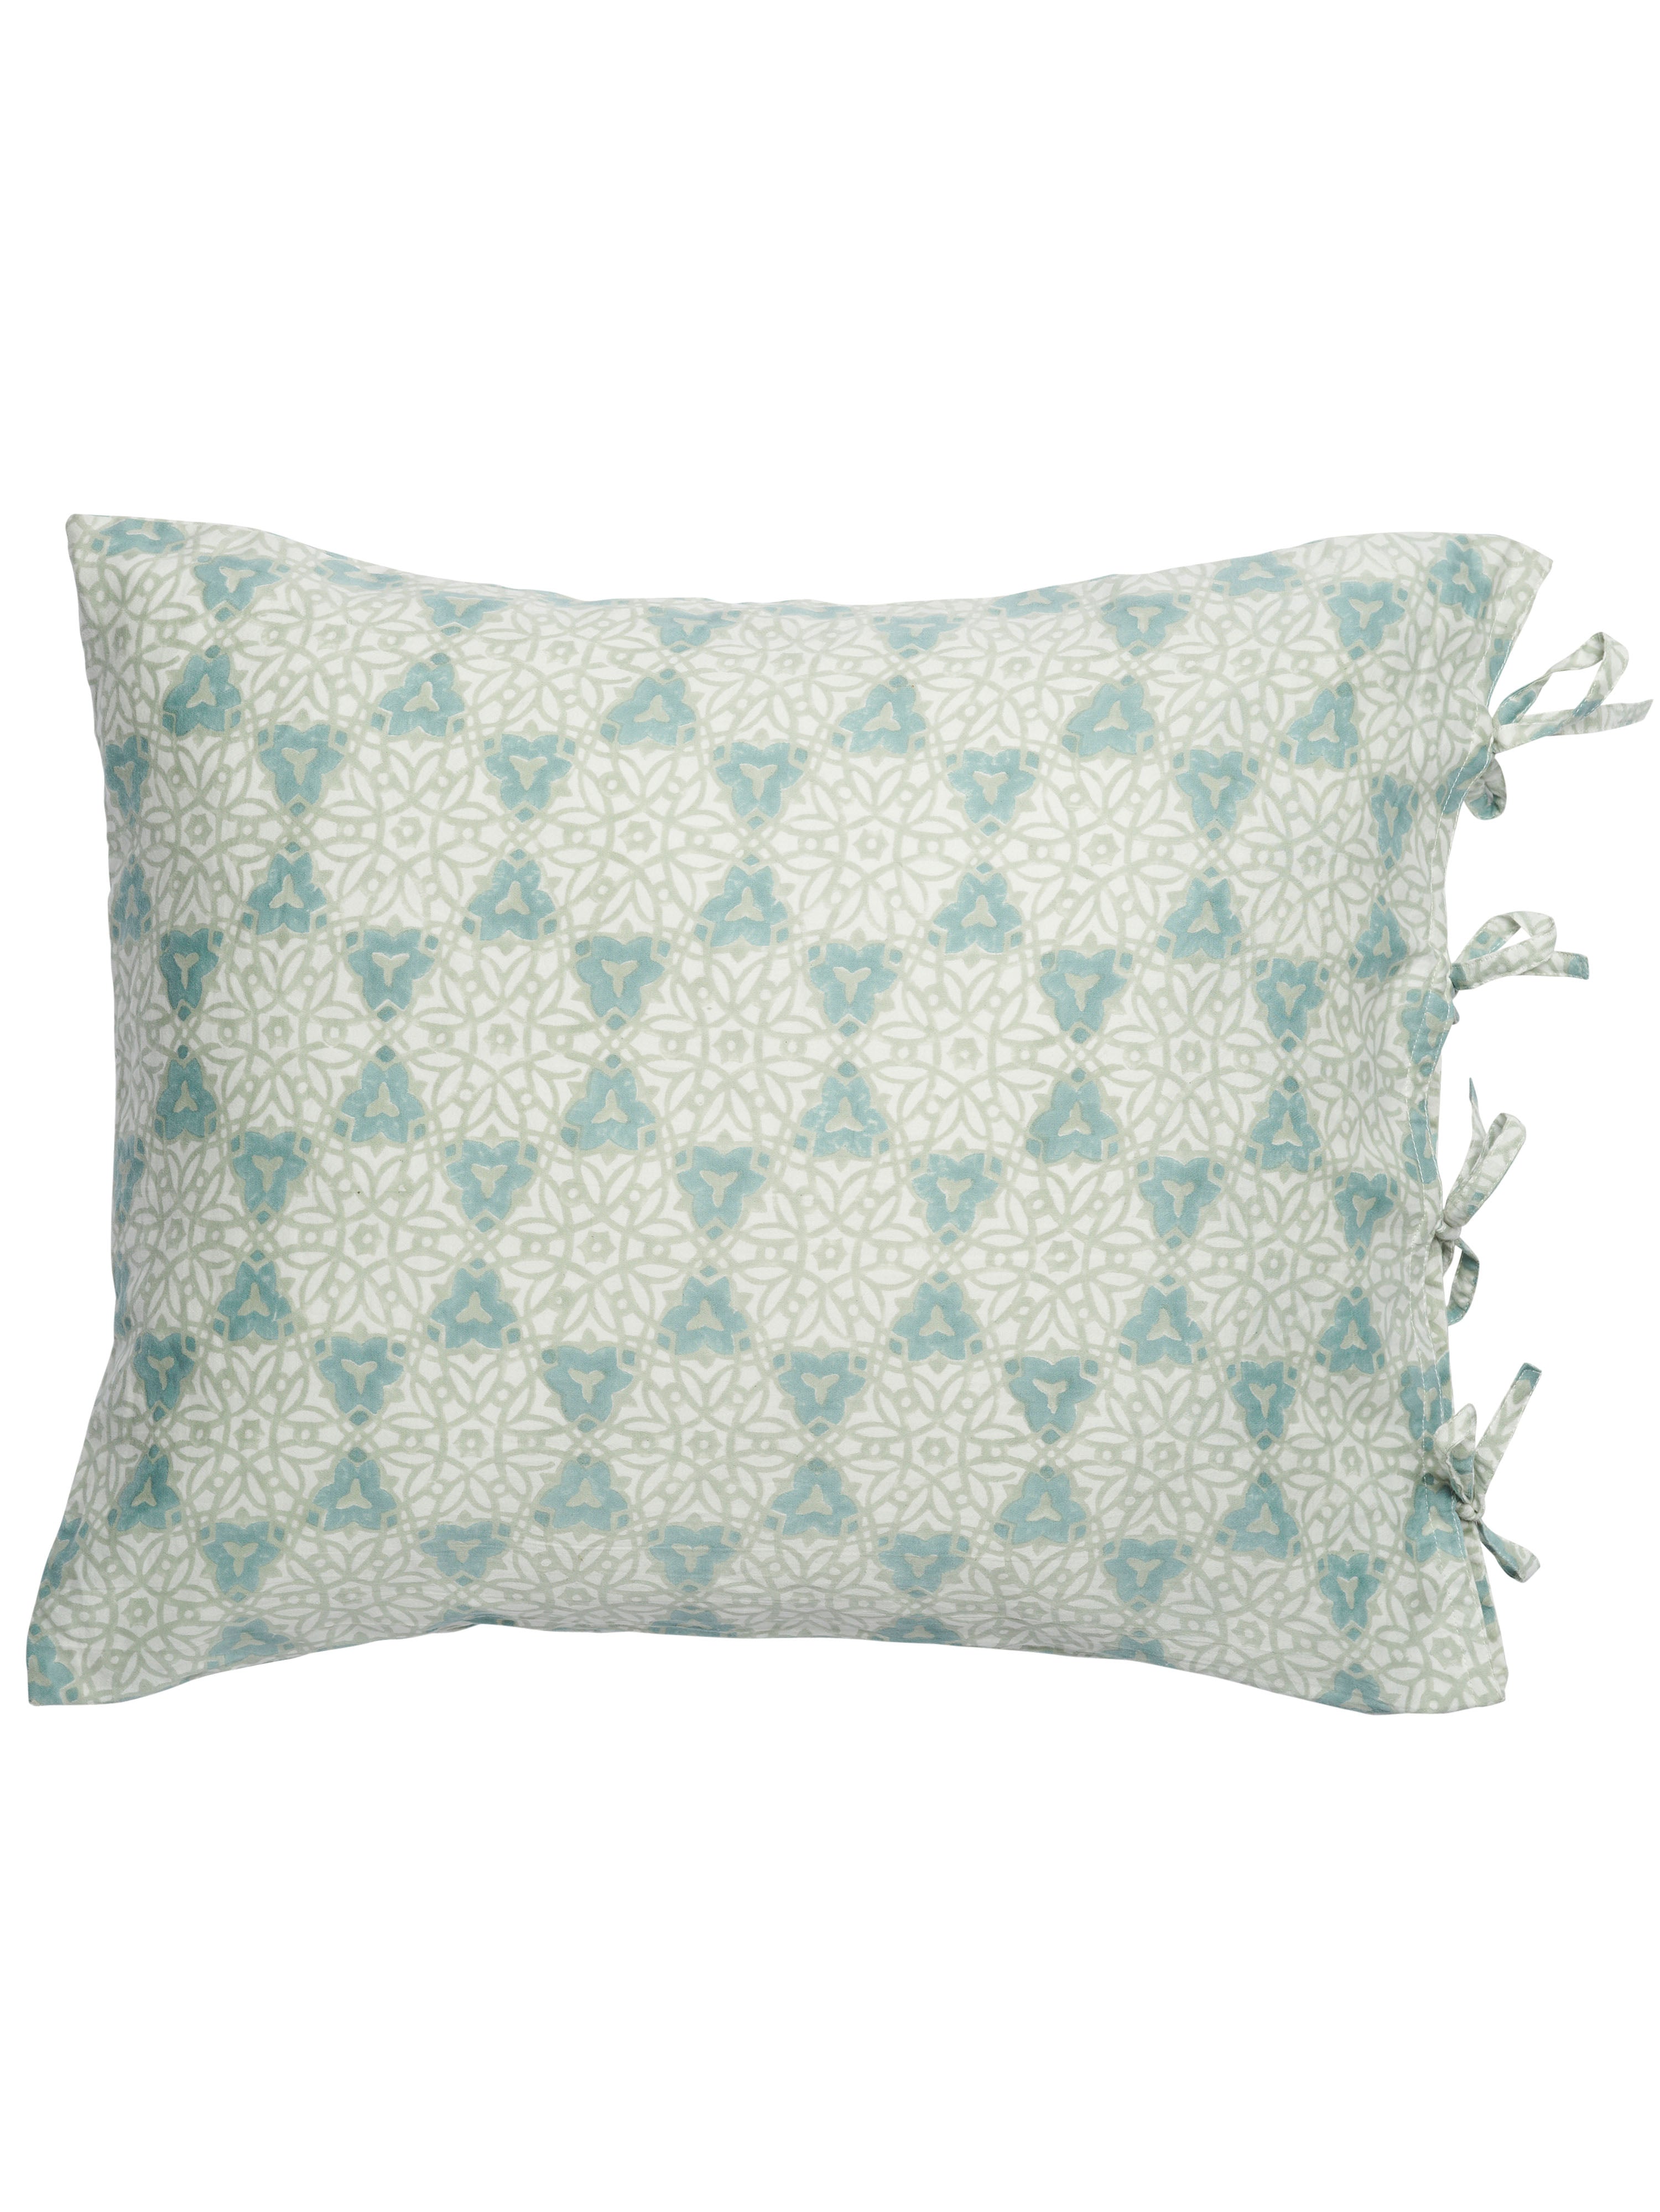 Pillowcases with City Palace print in Green & Beige